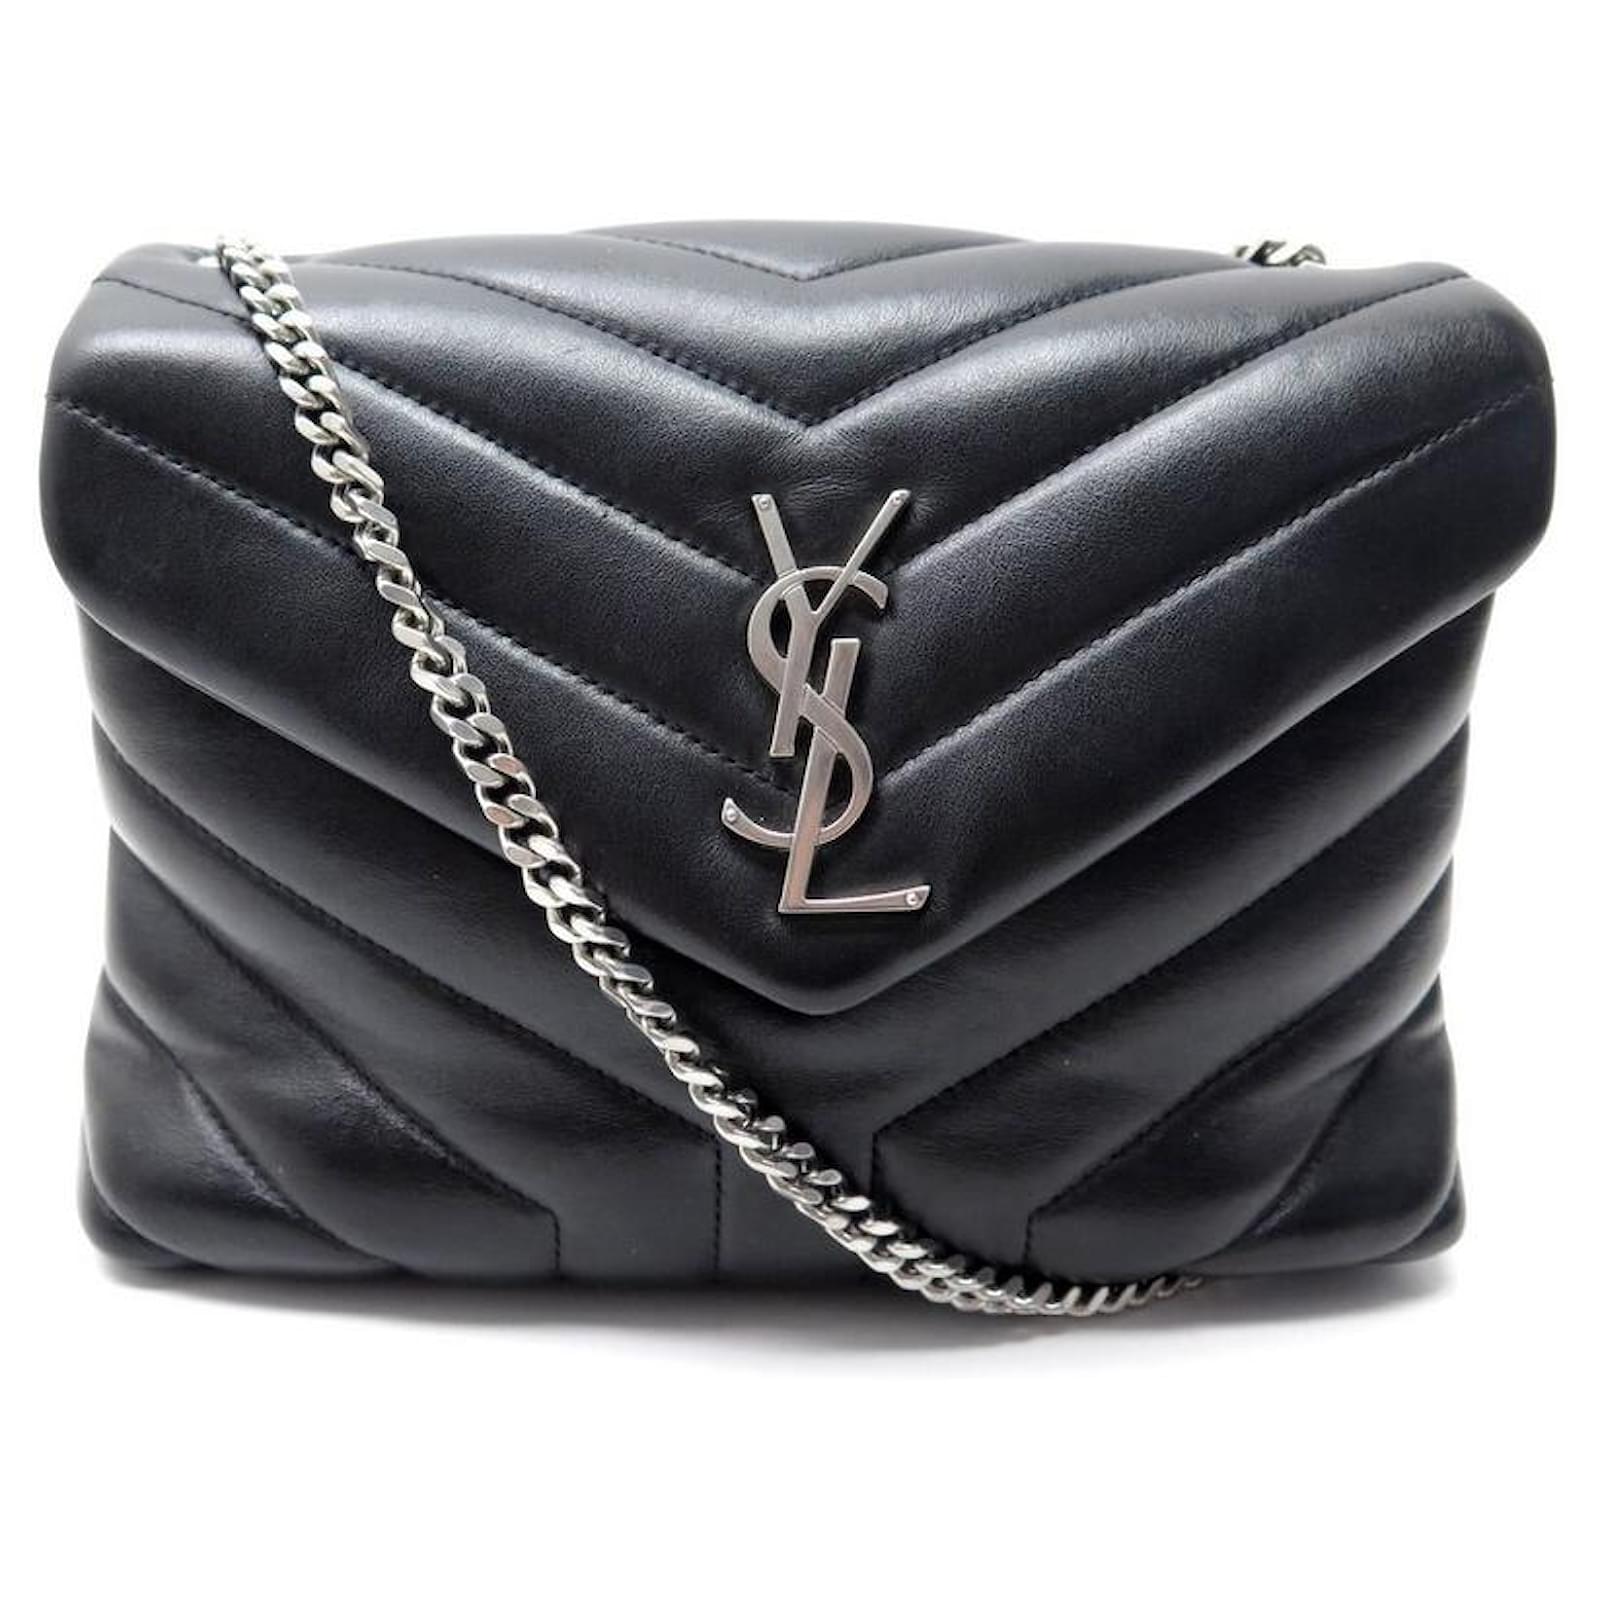 SAINT LAURENT Loulou small quilted leather shoulder bag  Leather shoulder  bag, Yves saint laurent bags, Quilted leather